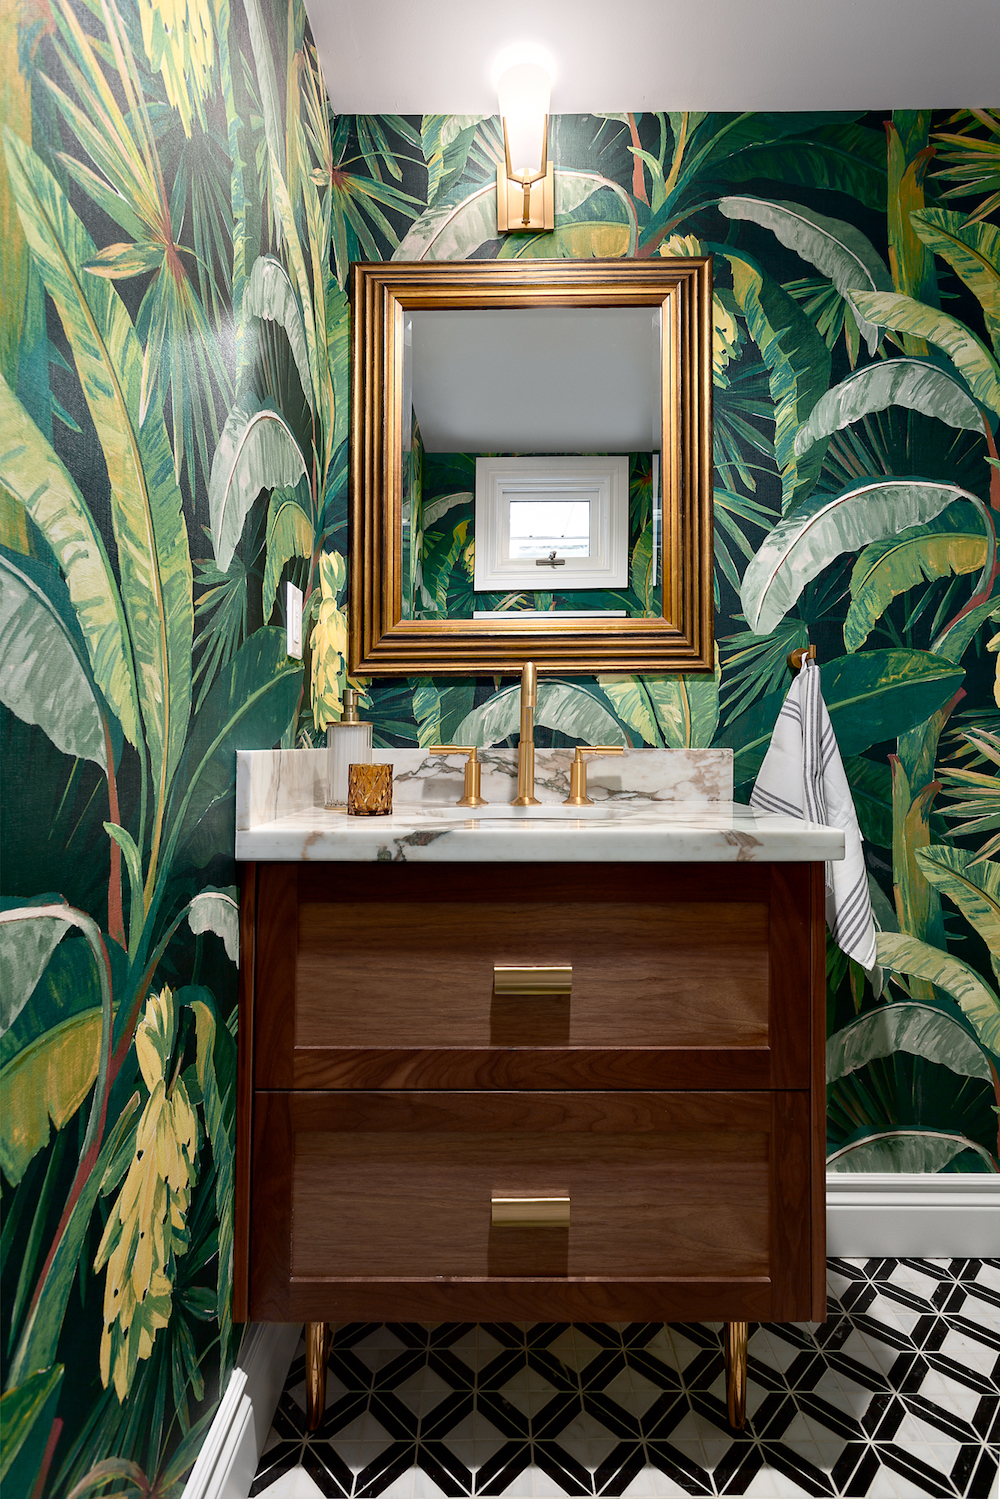 Tropical wallpaper in half bathroom with brass accents